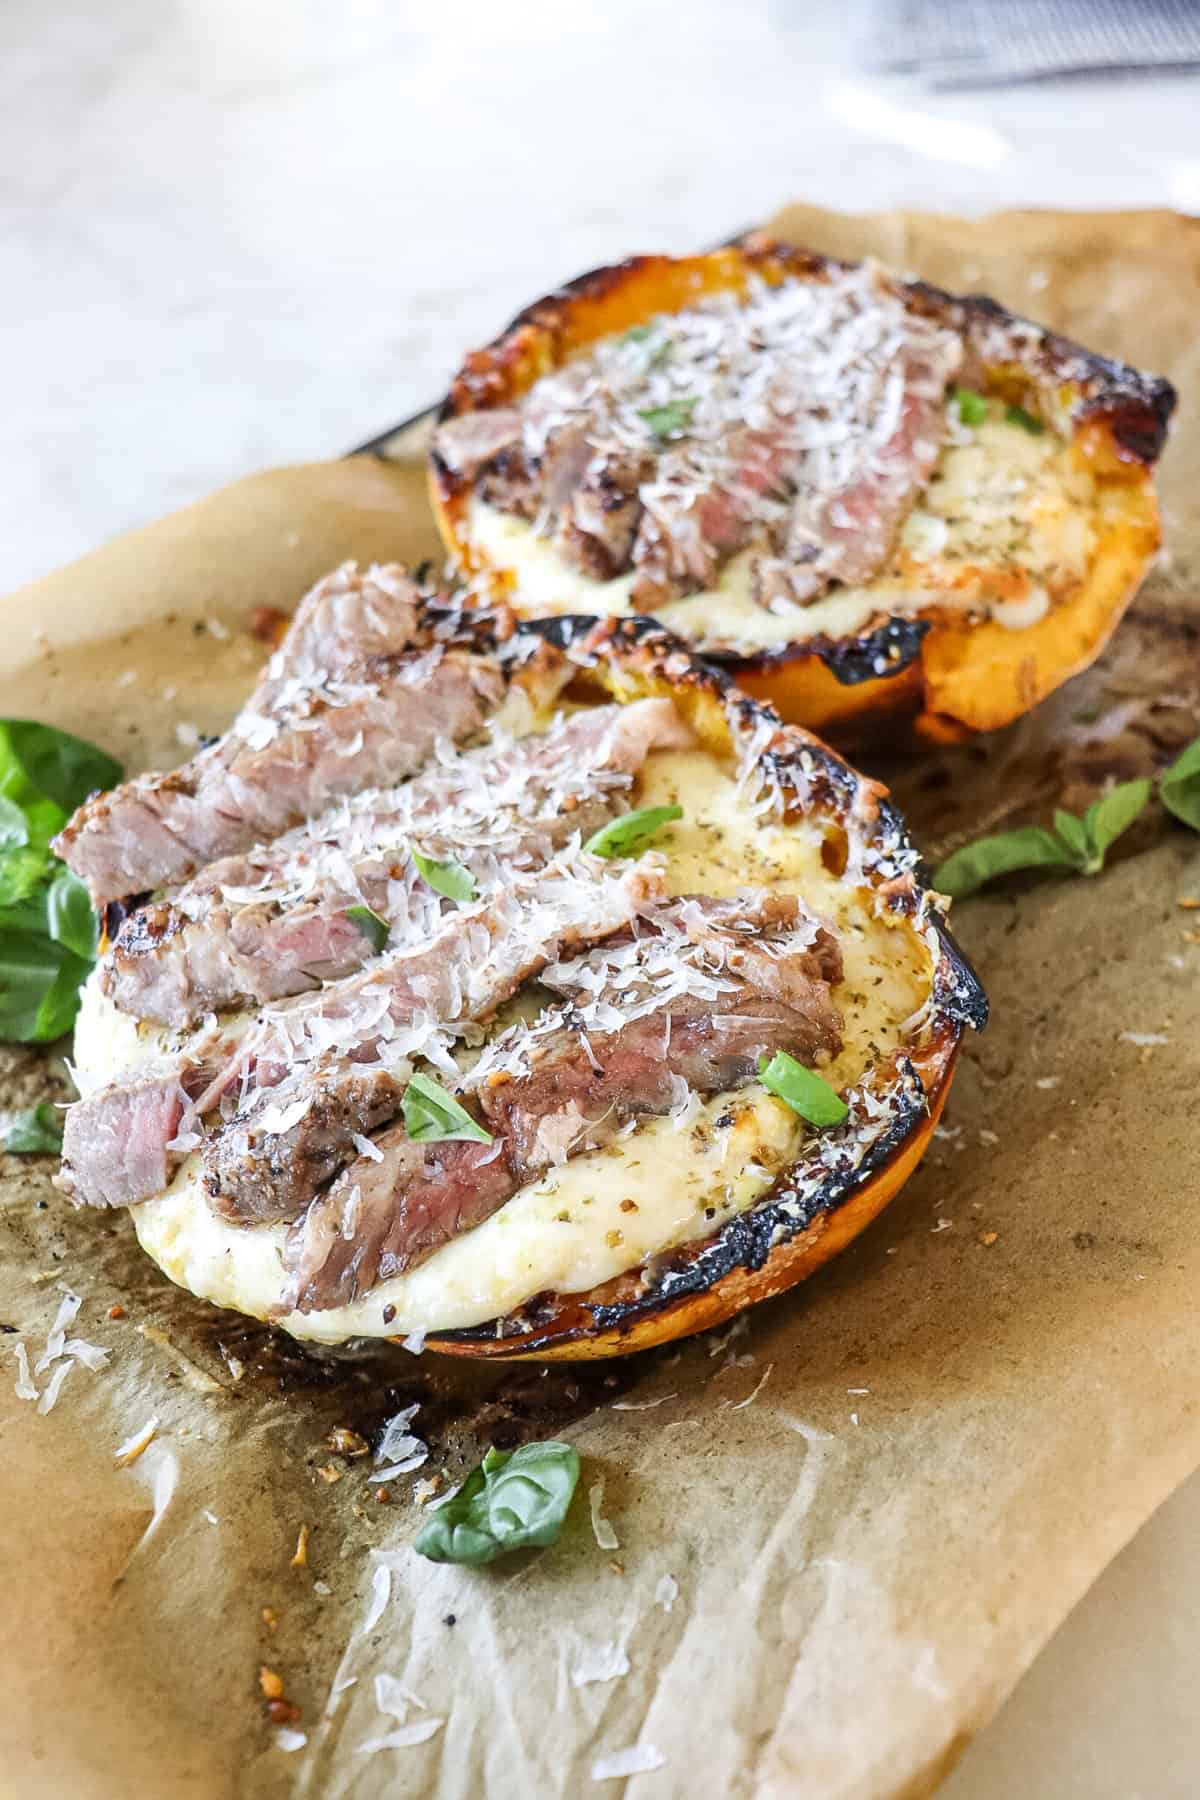 Two baked squashes filled with alfredo and topped with steak